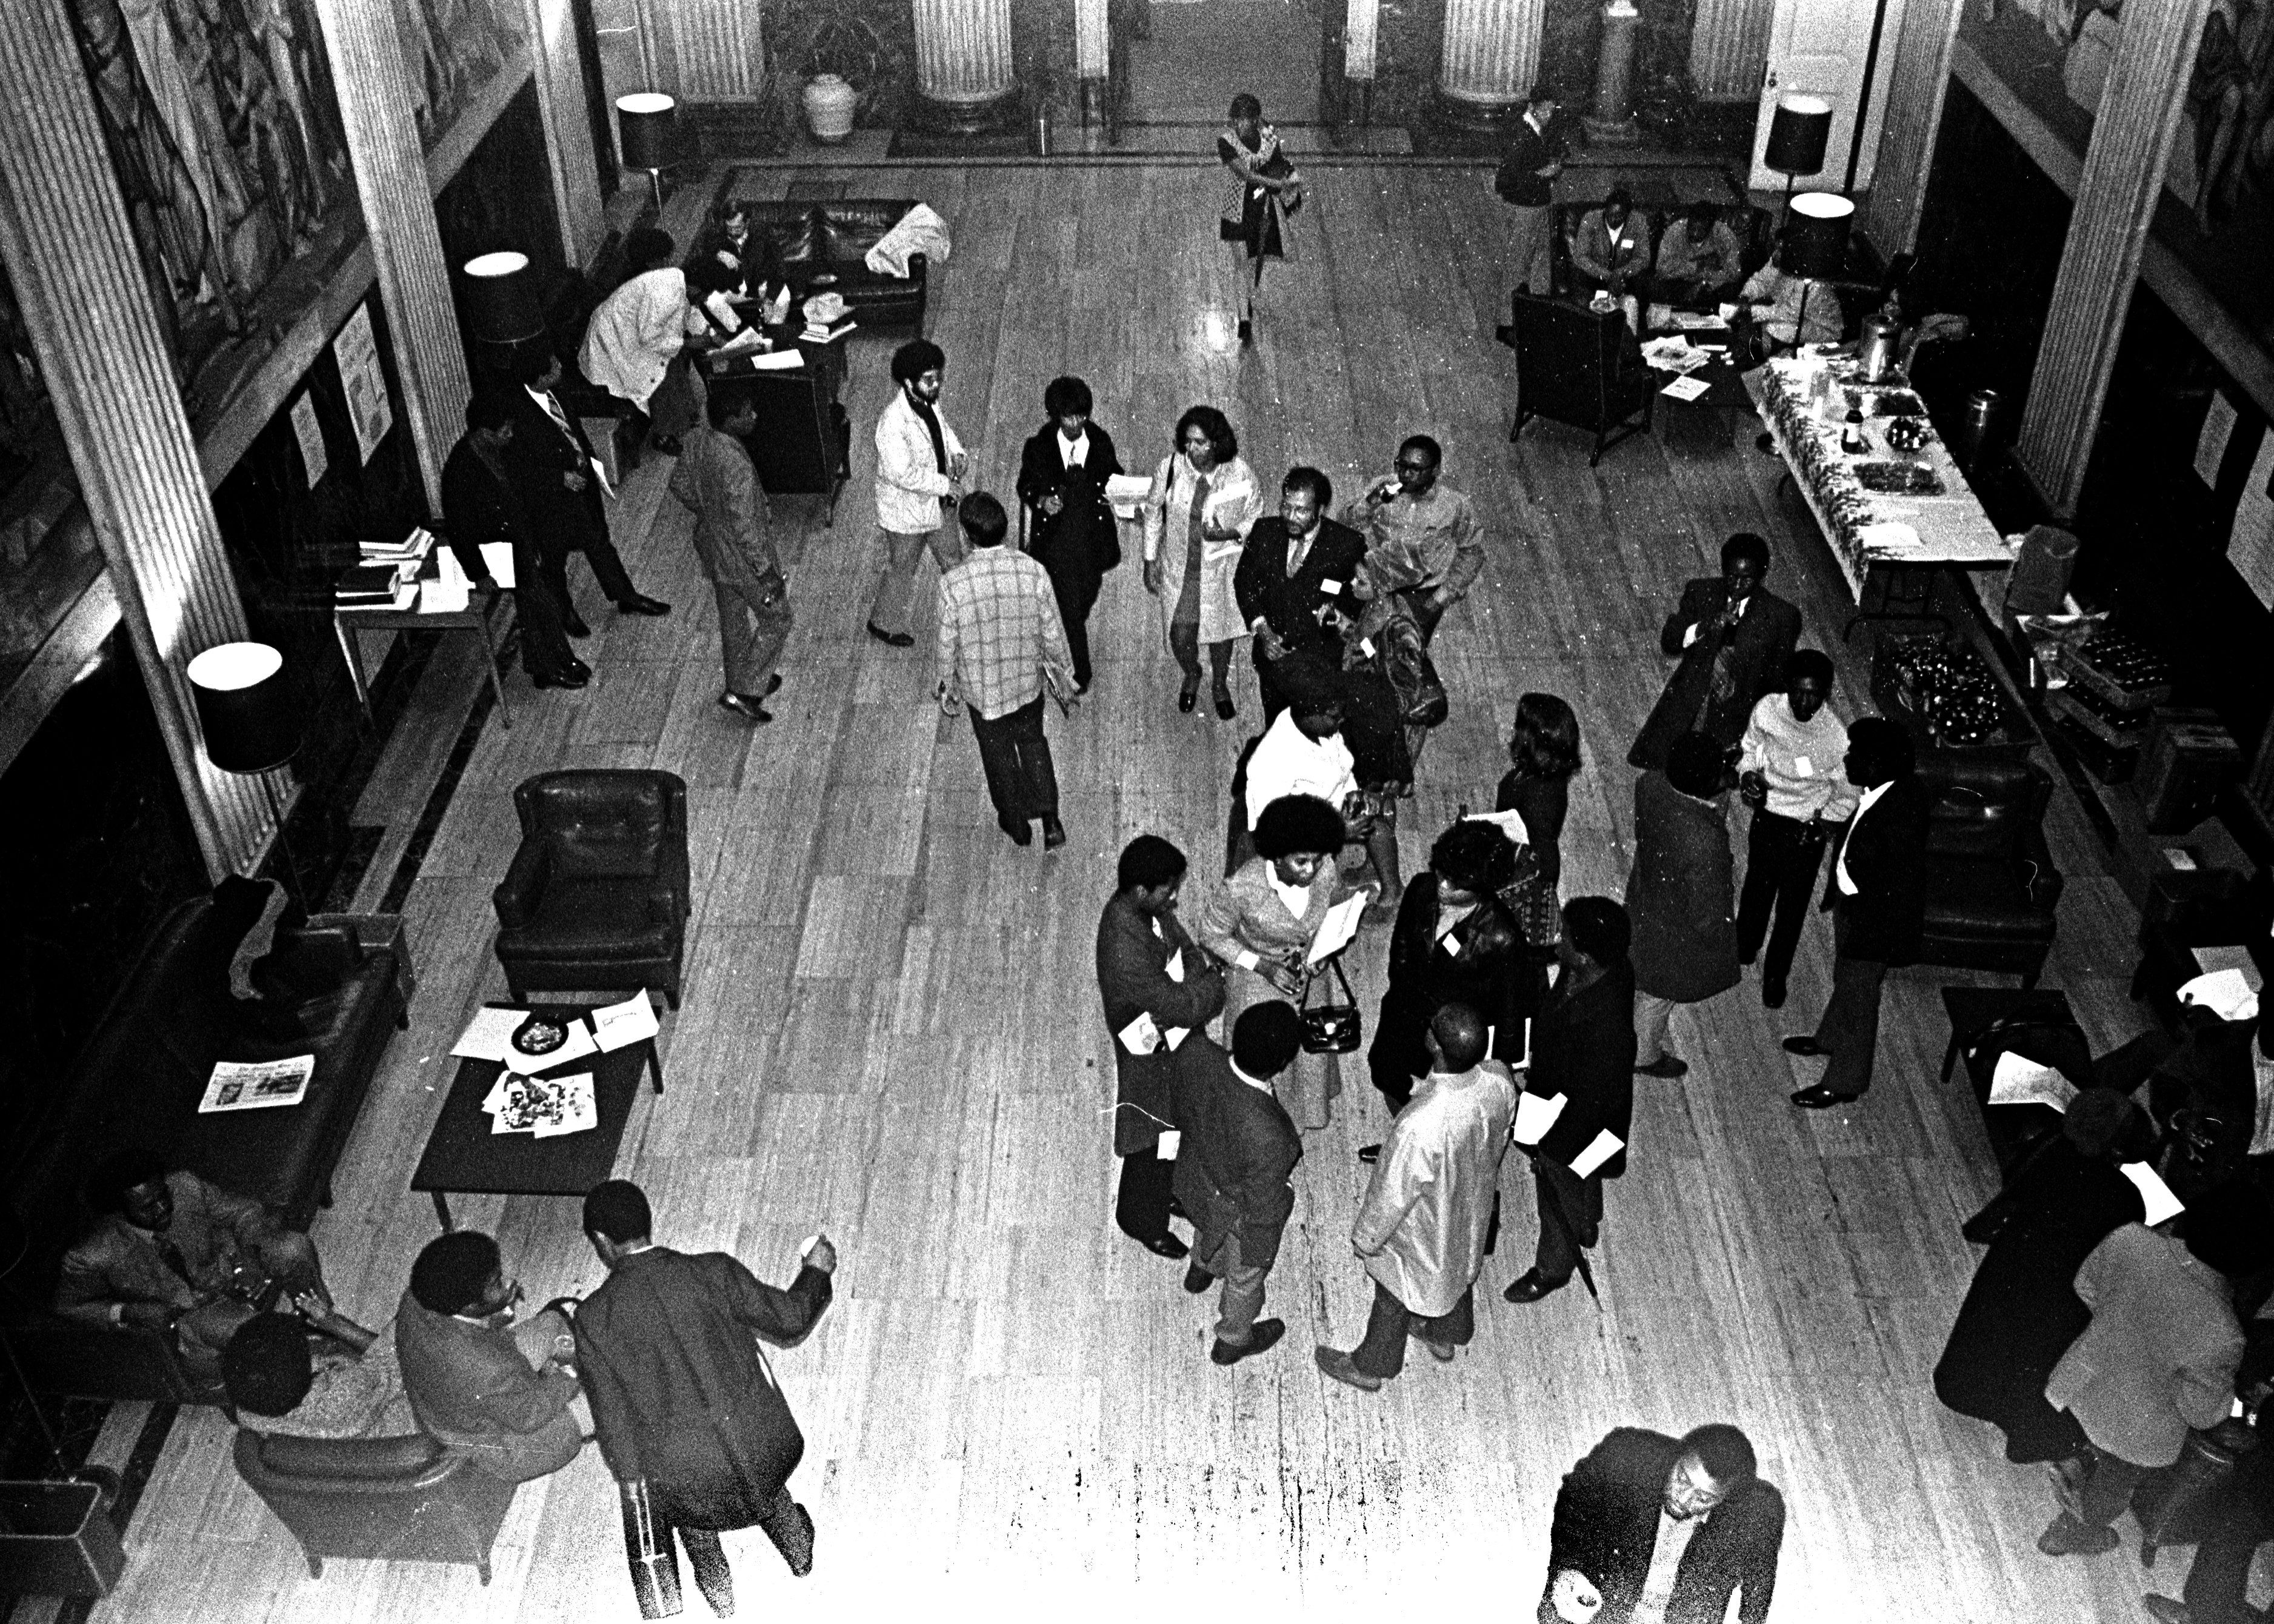 Minority Pre Law Conference in Mural Hall